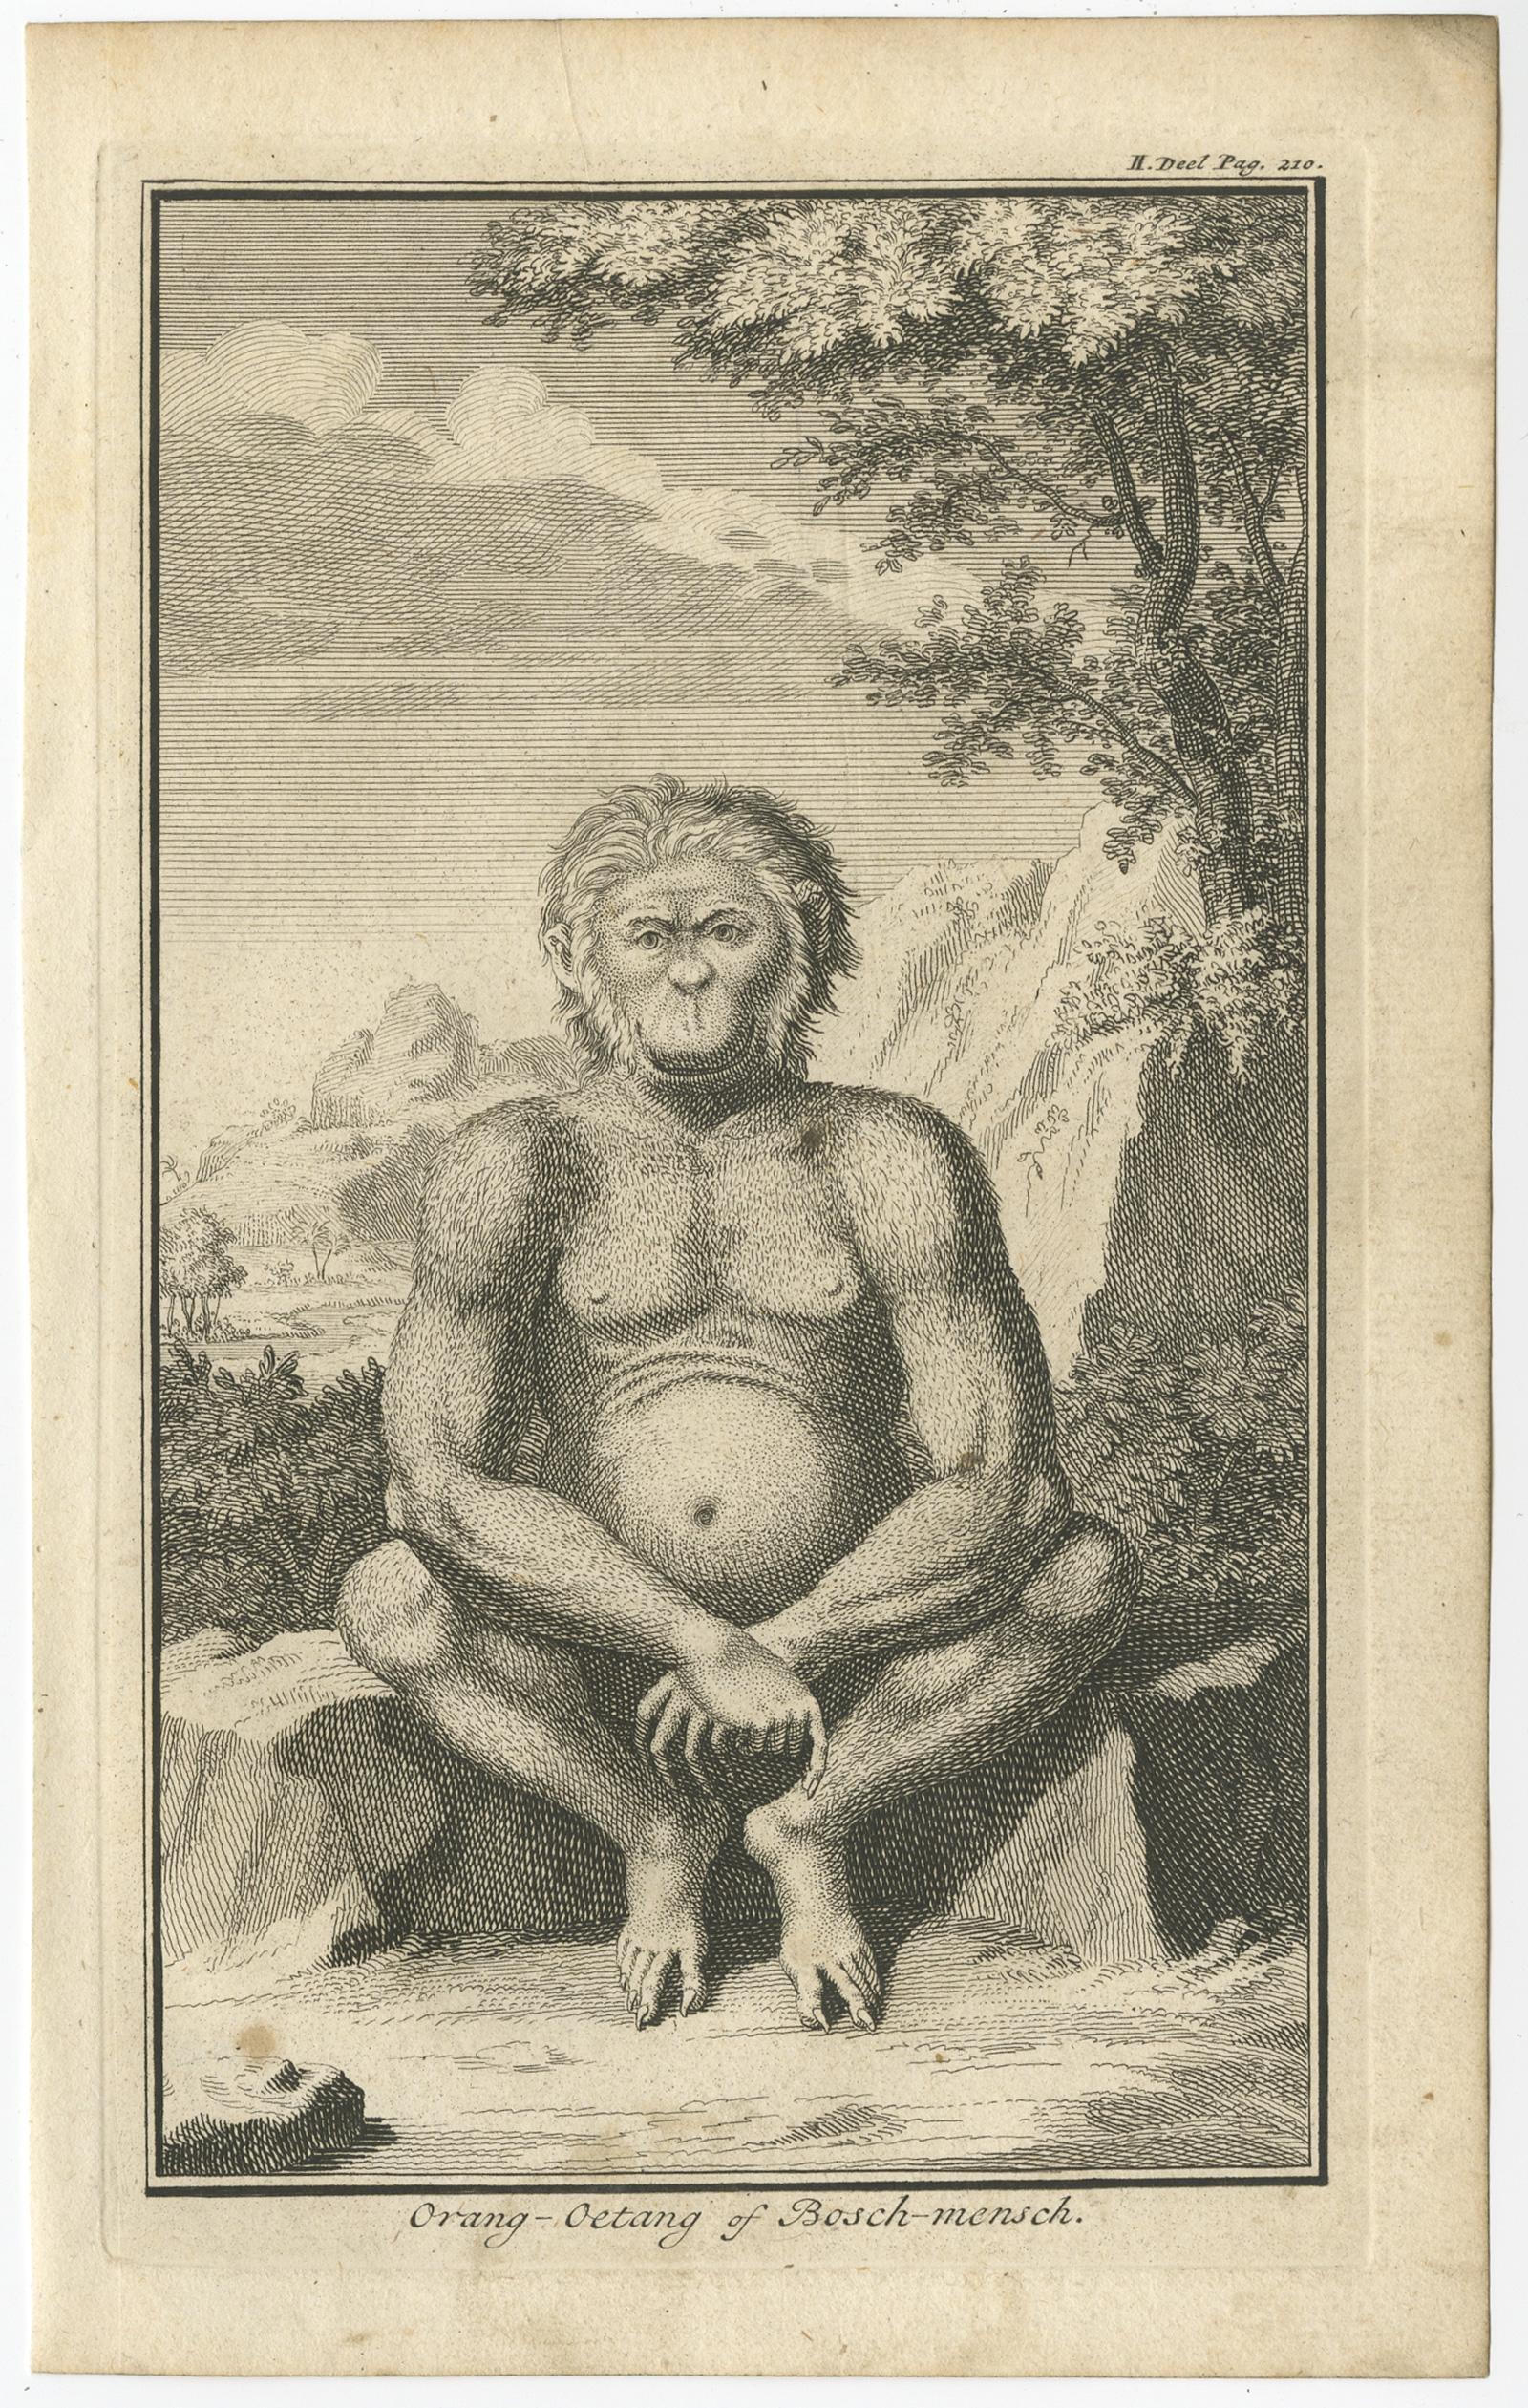 Antique print titled 'Orang-Oetang of Bosch-mensch'. This print depicts an Orang-Utan on Borneo or Sumatra, Indonesia. Originates from 'Hedendaagsche Historie, of tegenwoordige staat van alle volkeren' published by I. Tirion. 

Artists and